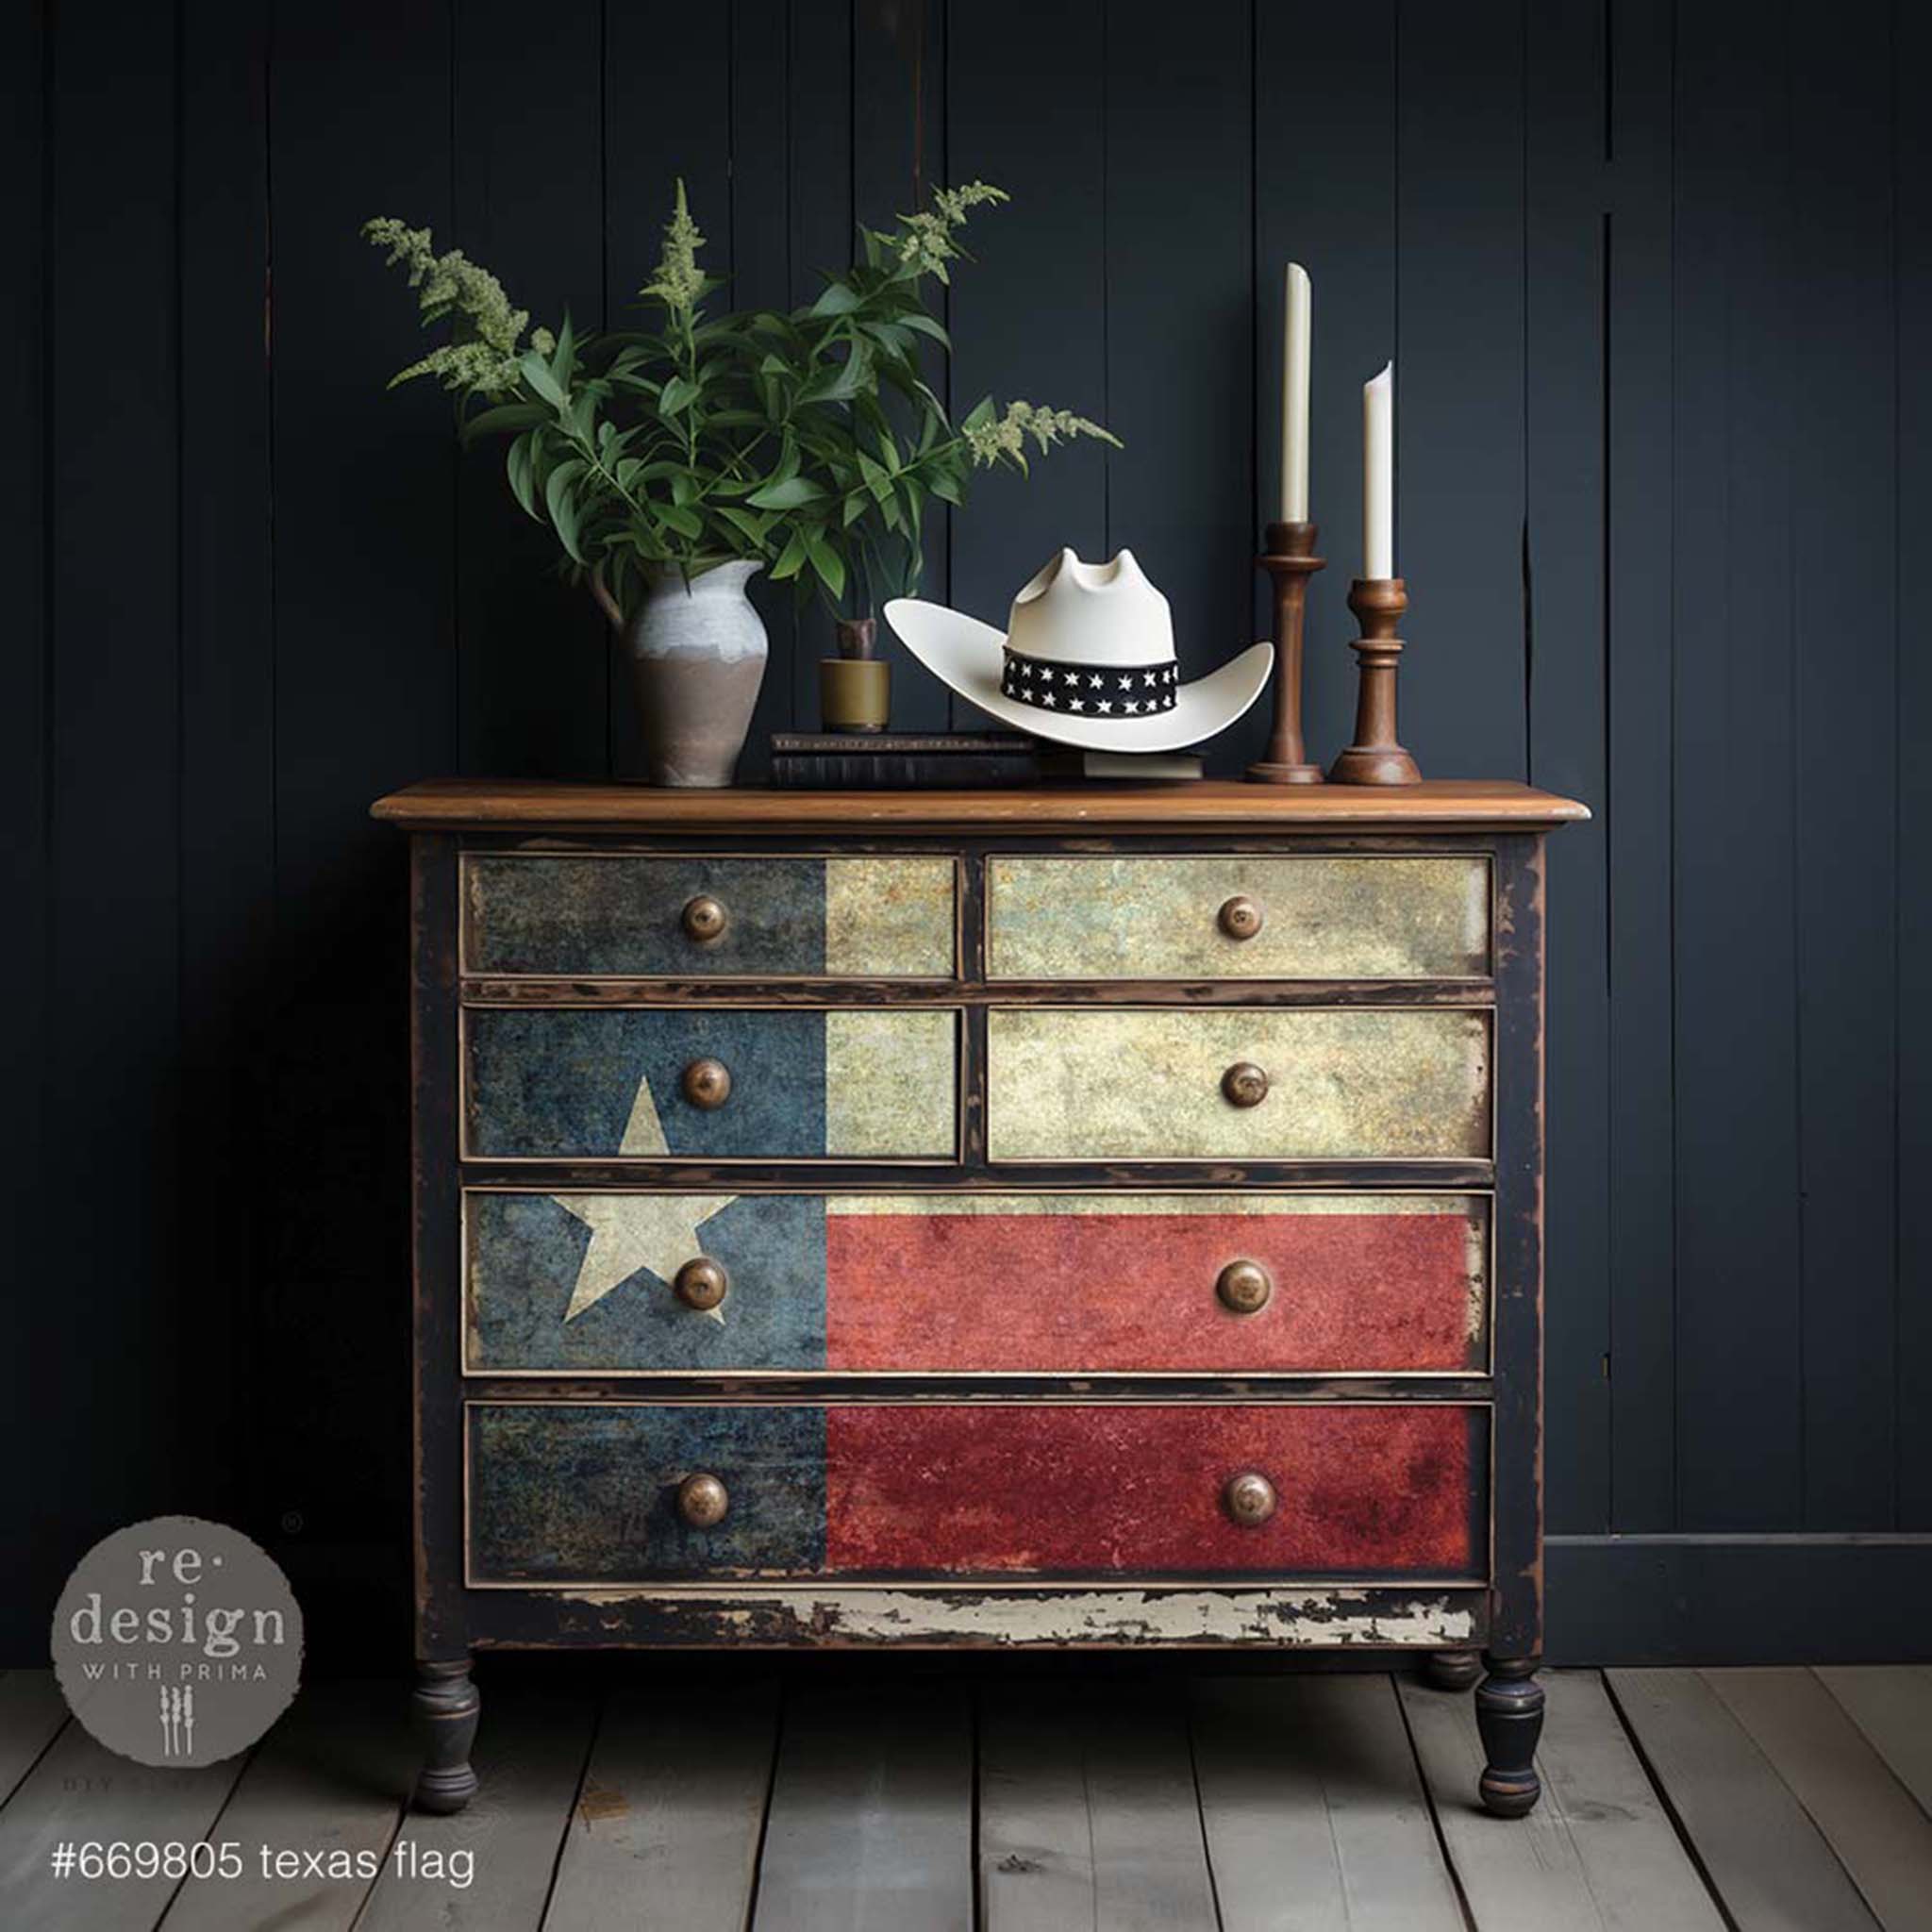 A vintage 6-drawer dresser is painted a weathered dark blue and features ReDesign with Prima's Texas flag A1 fiber paper on its drawers.